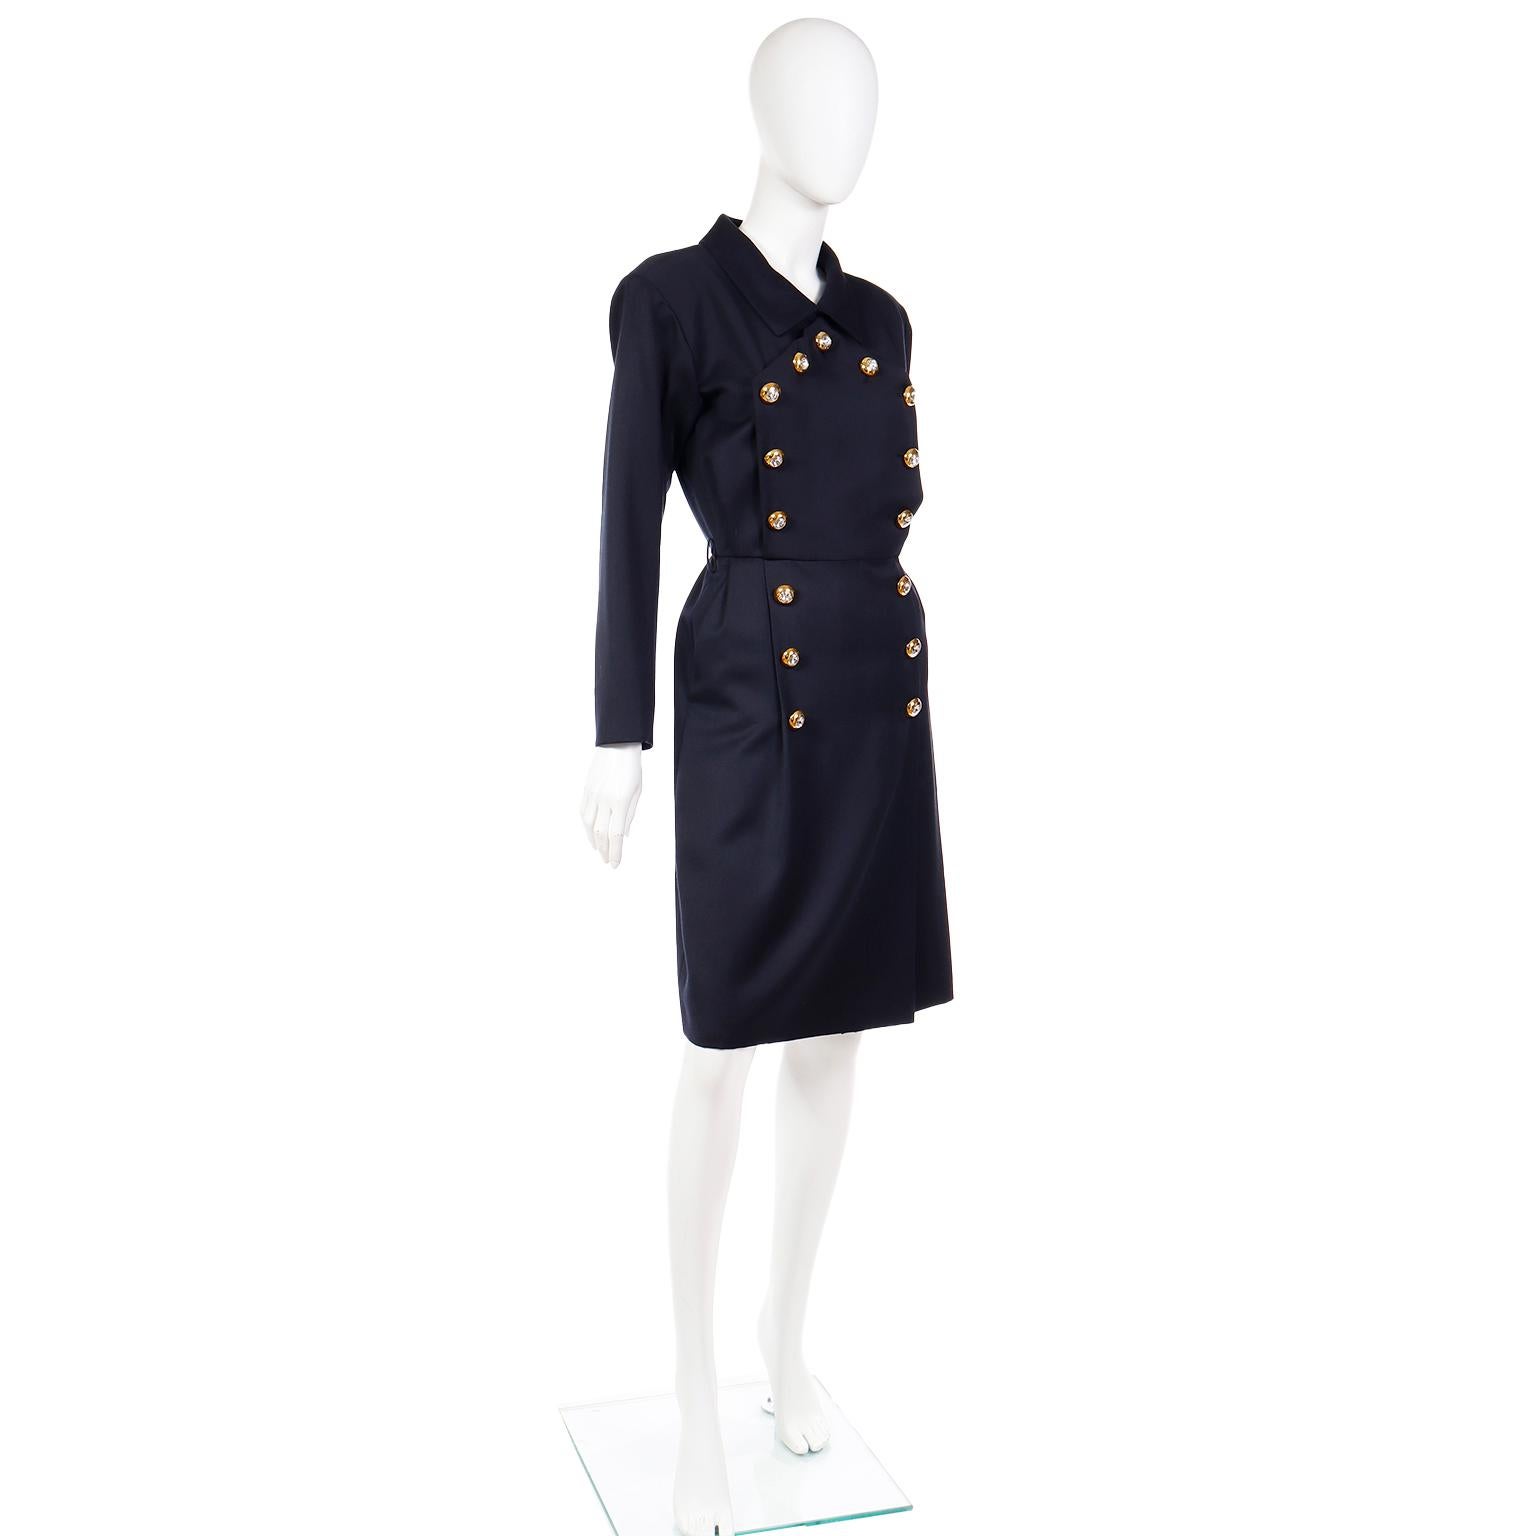 1992 Yves Saint Laurent Vintage Navy Blue Runway Dress W Gold & Crystal Buttons In Excellent Condition For Sale In Portland, OR